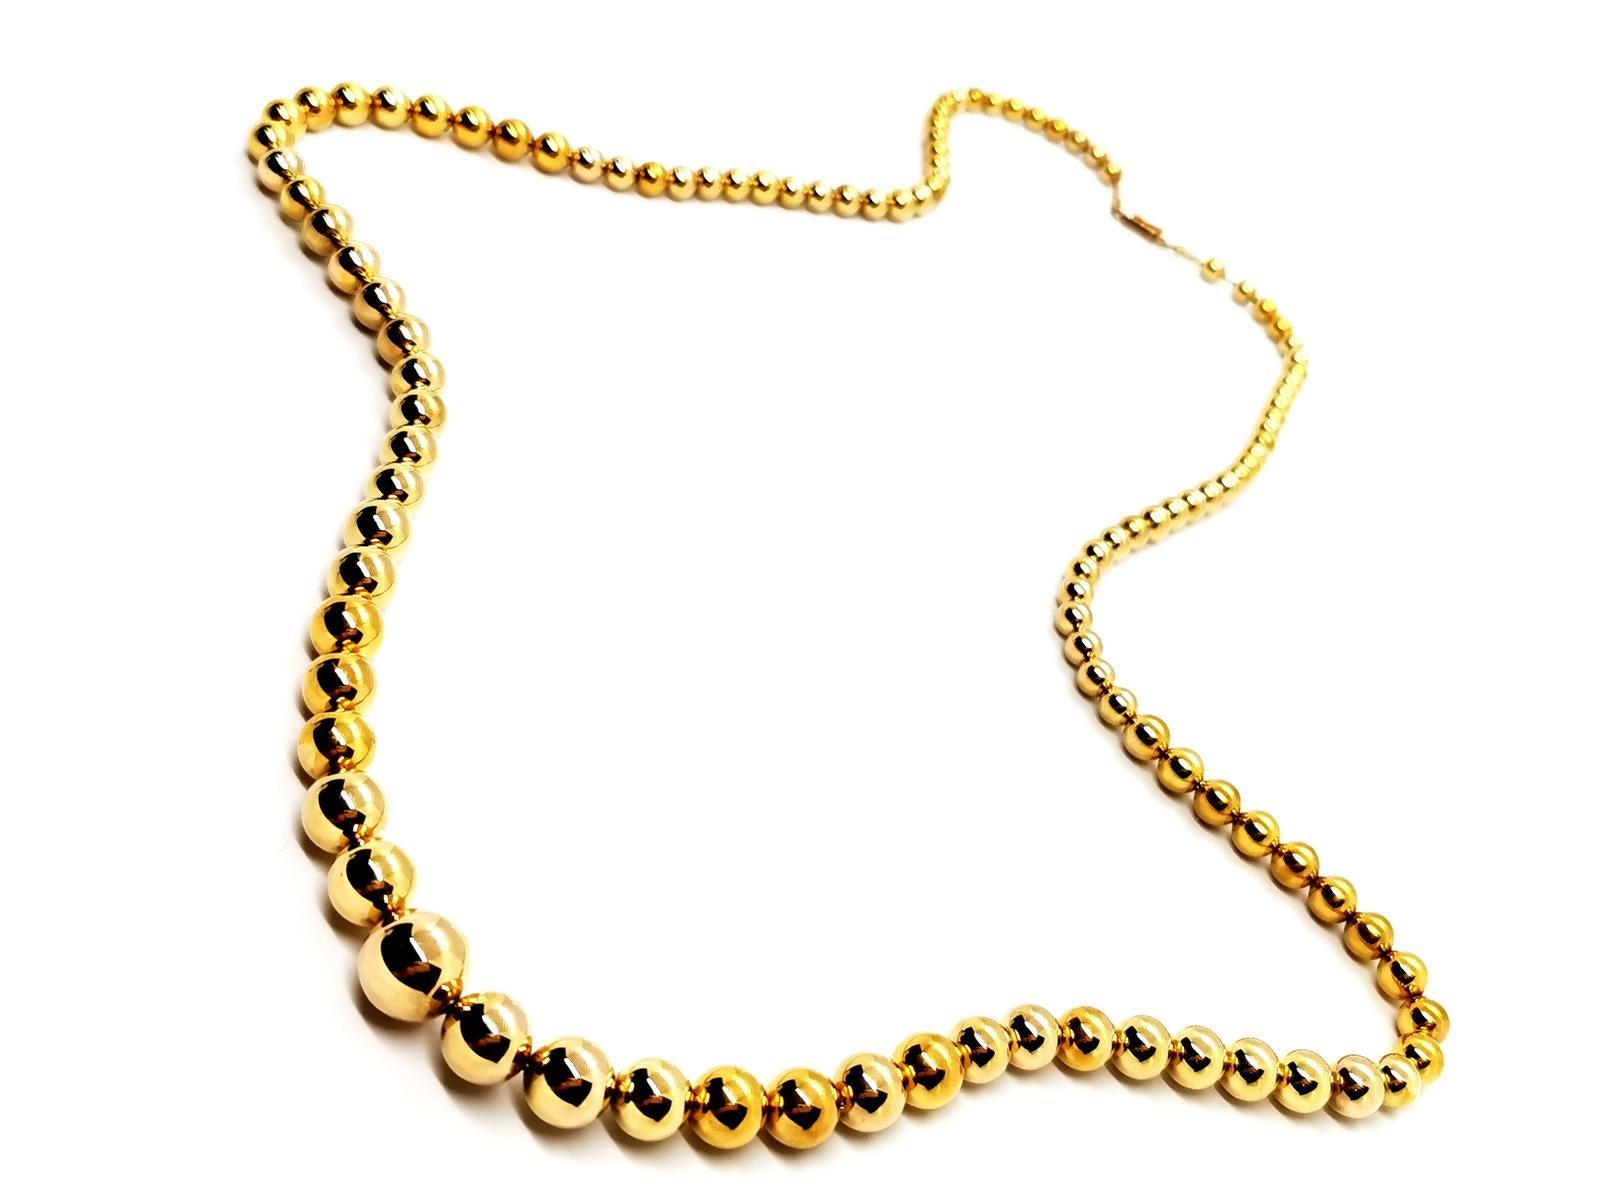 Long necklace balls. in 750 thousandths yellow gold (18 carats). falling. length: 82 cm. max width: 1.21 cm. min width: 0.53 cm. clasp with safety eight. total weight: 46.46 g. eagle's head hallmark. excellent condition
